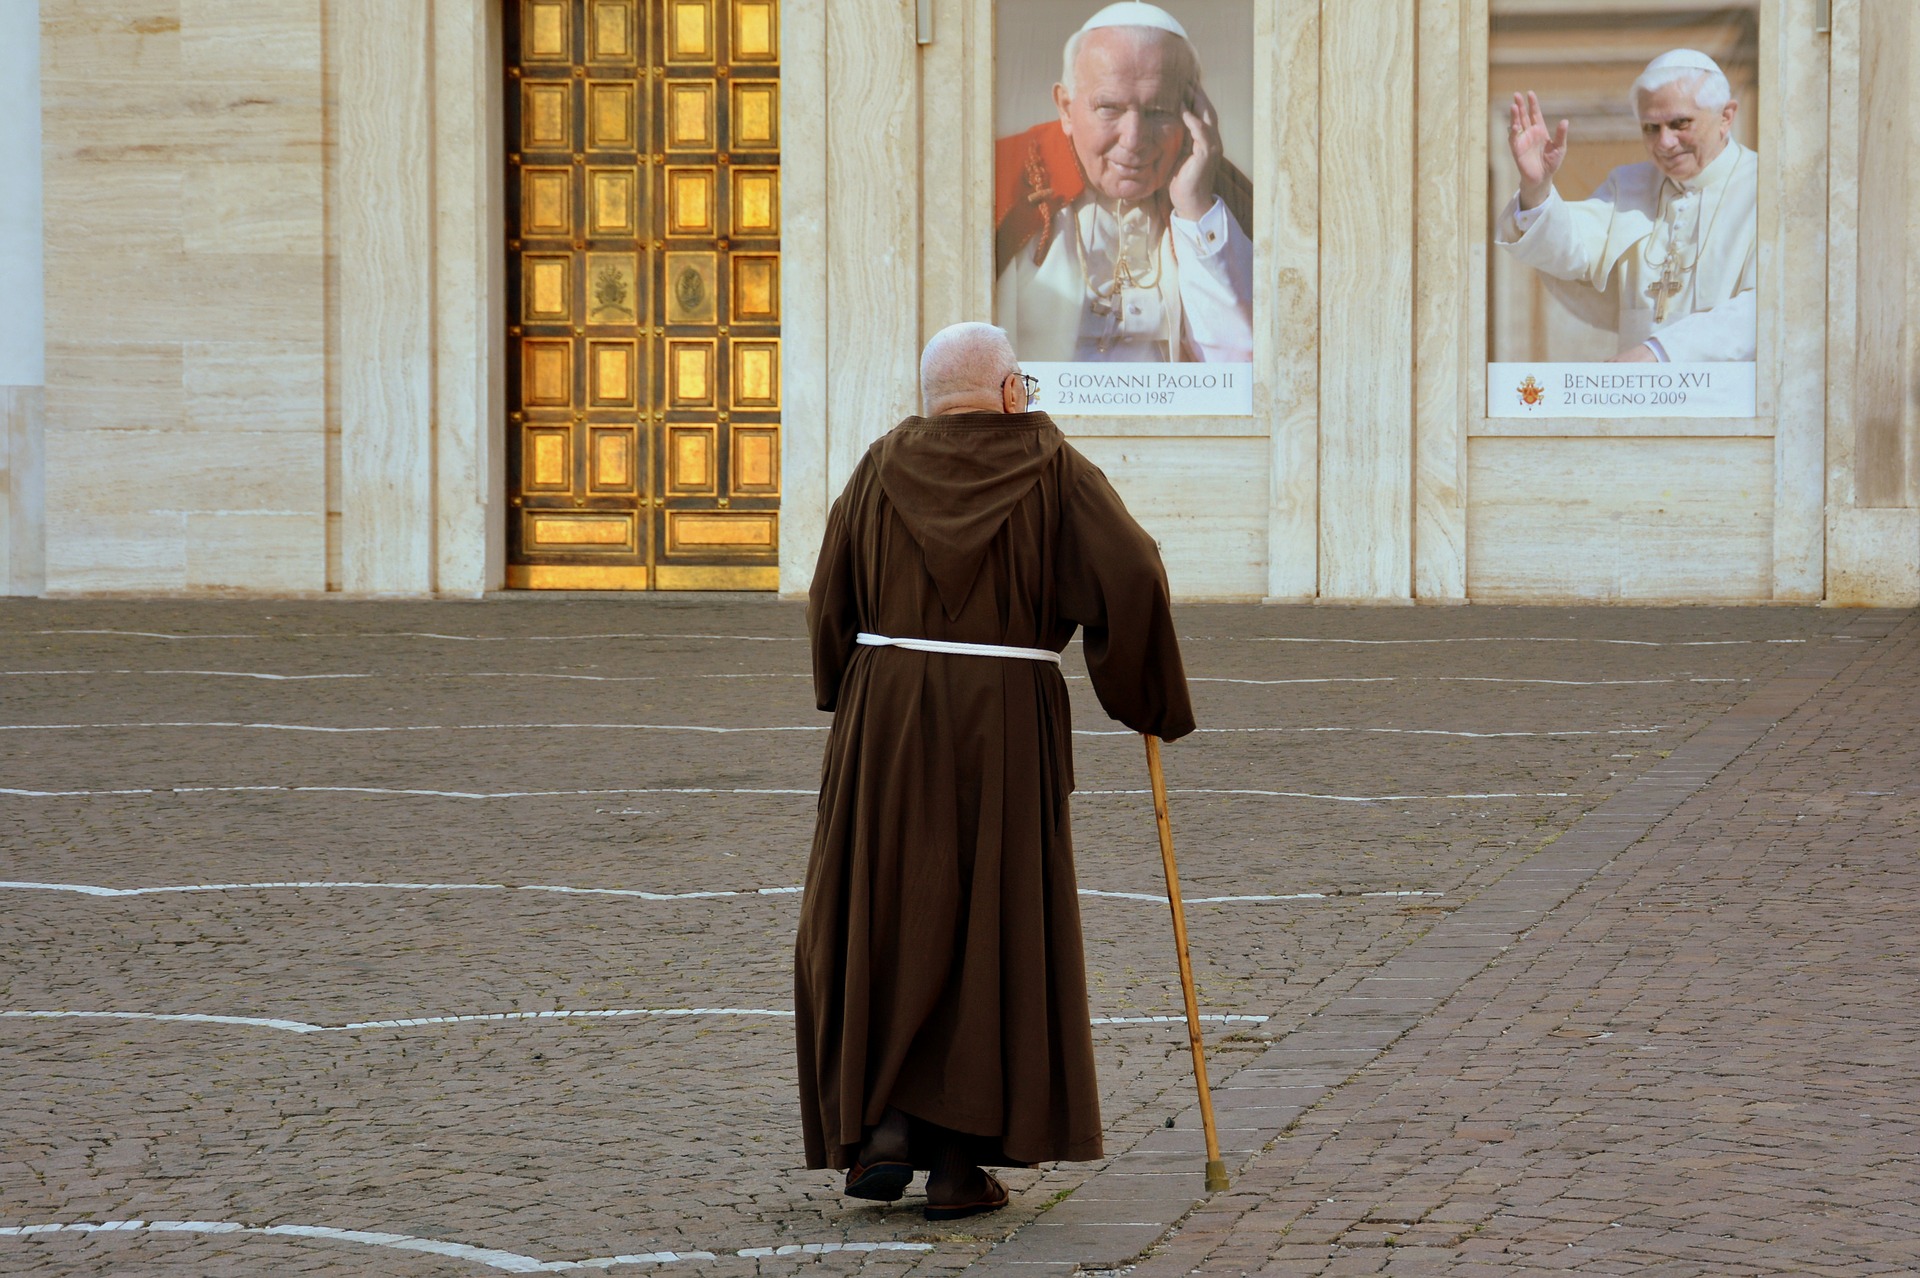 Popes in shop-windows and monk